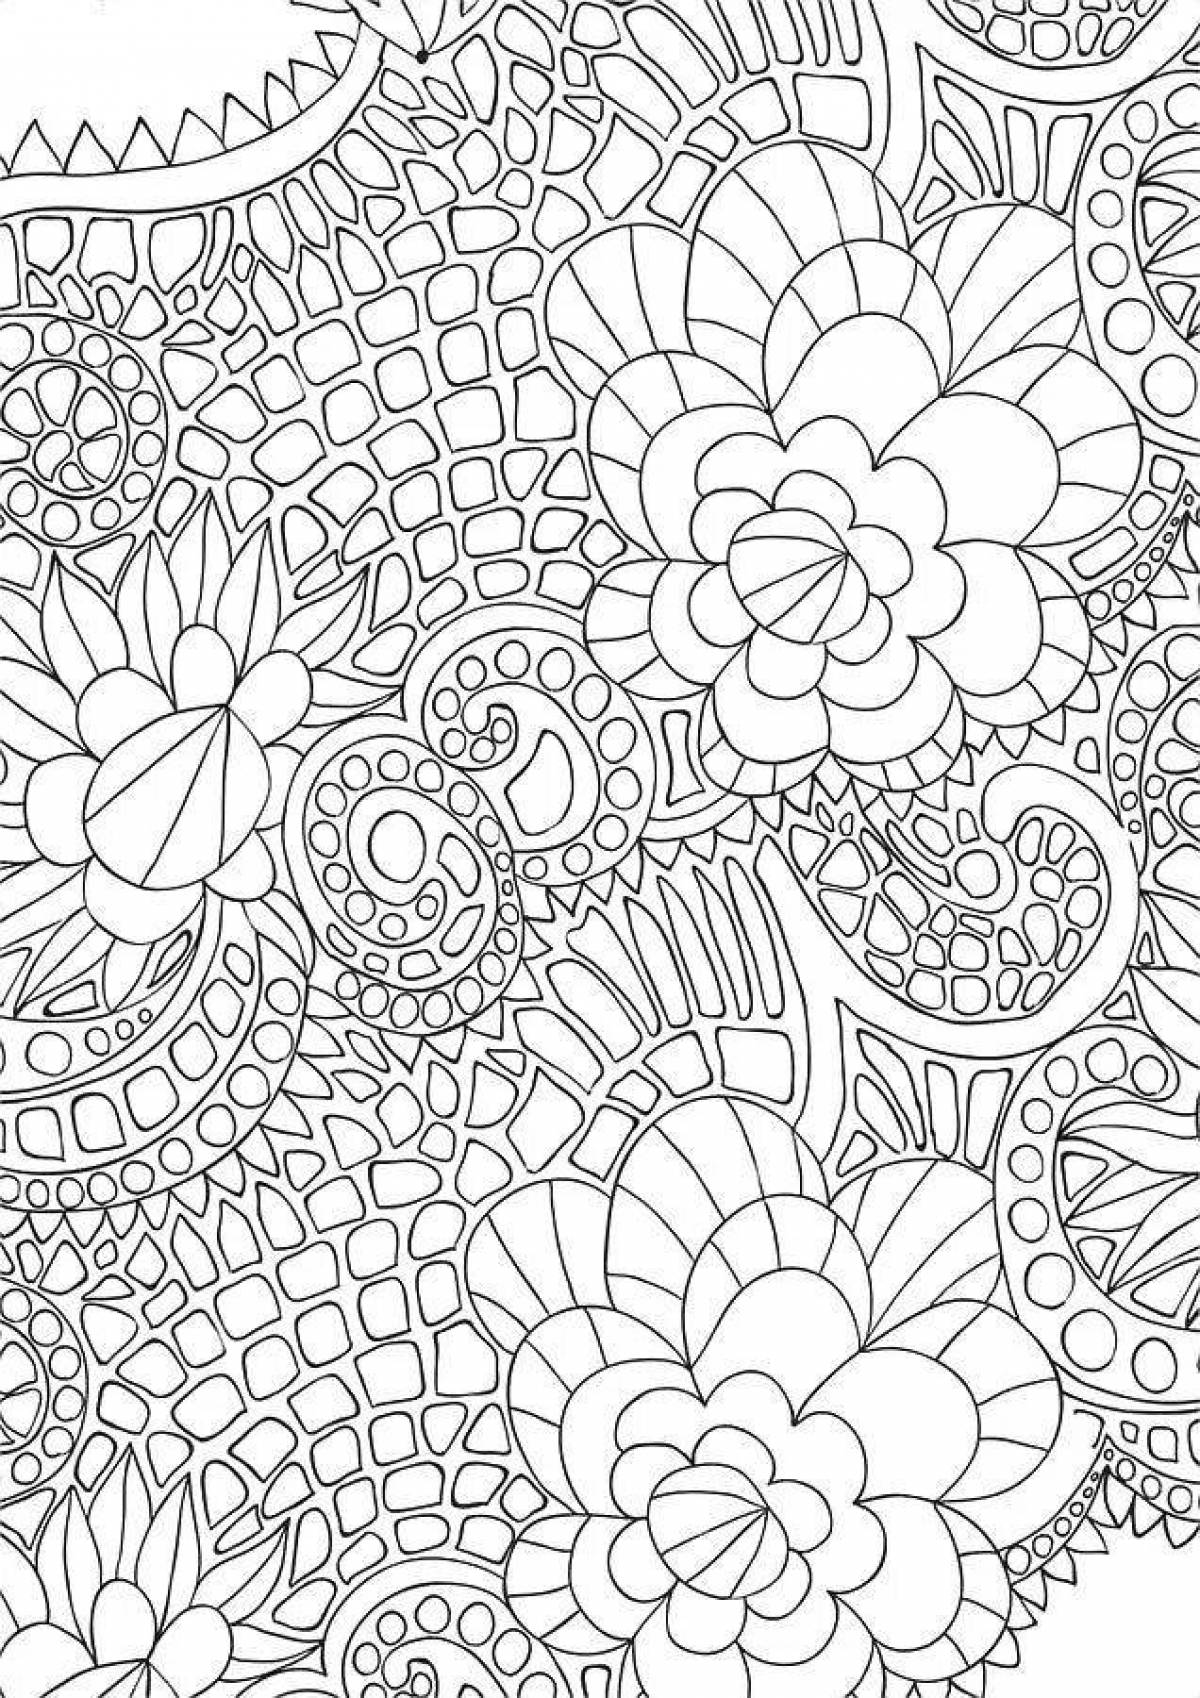 Intricate patterns coloring page - generous